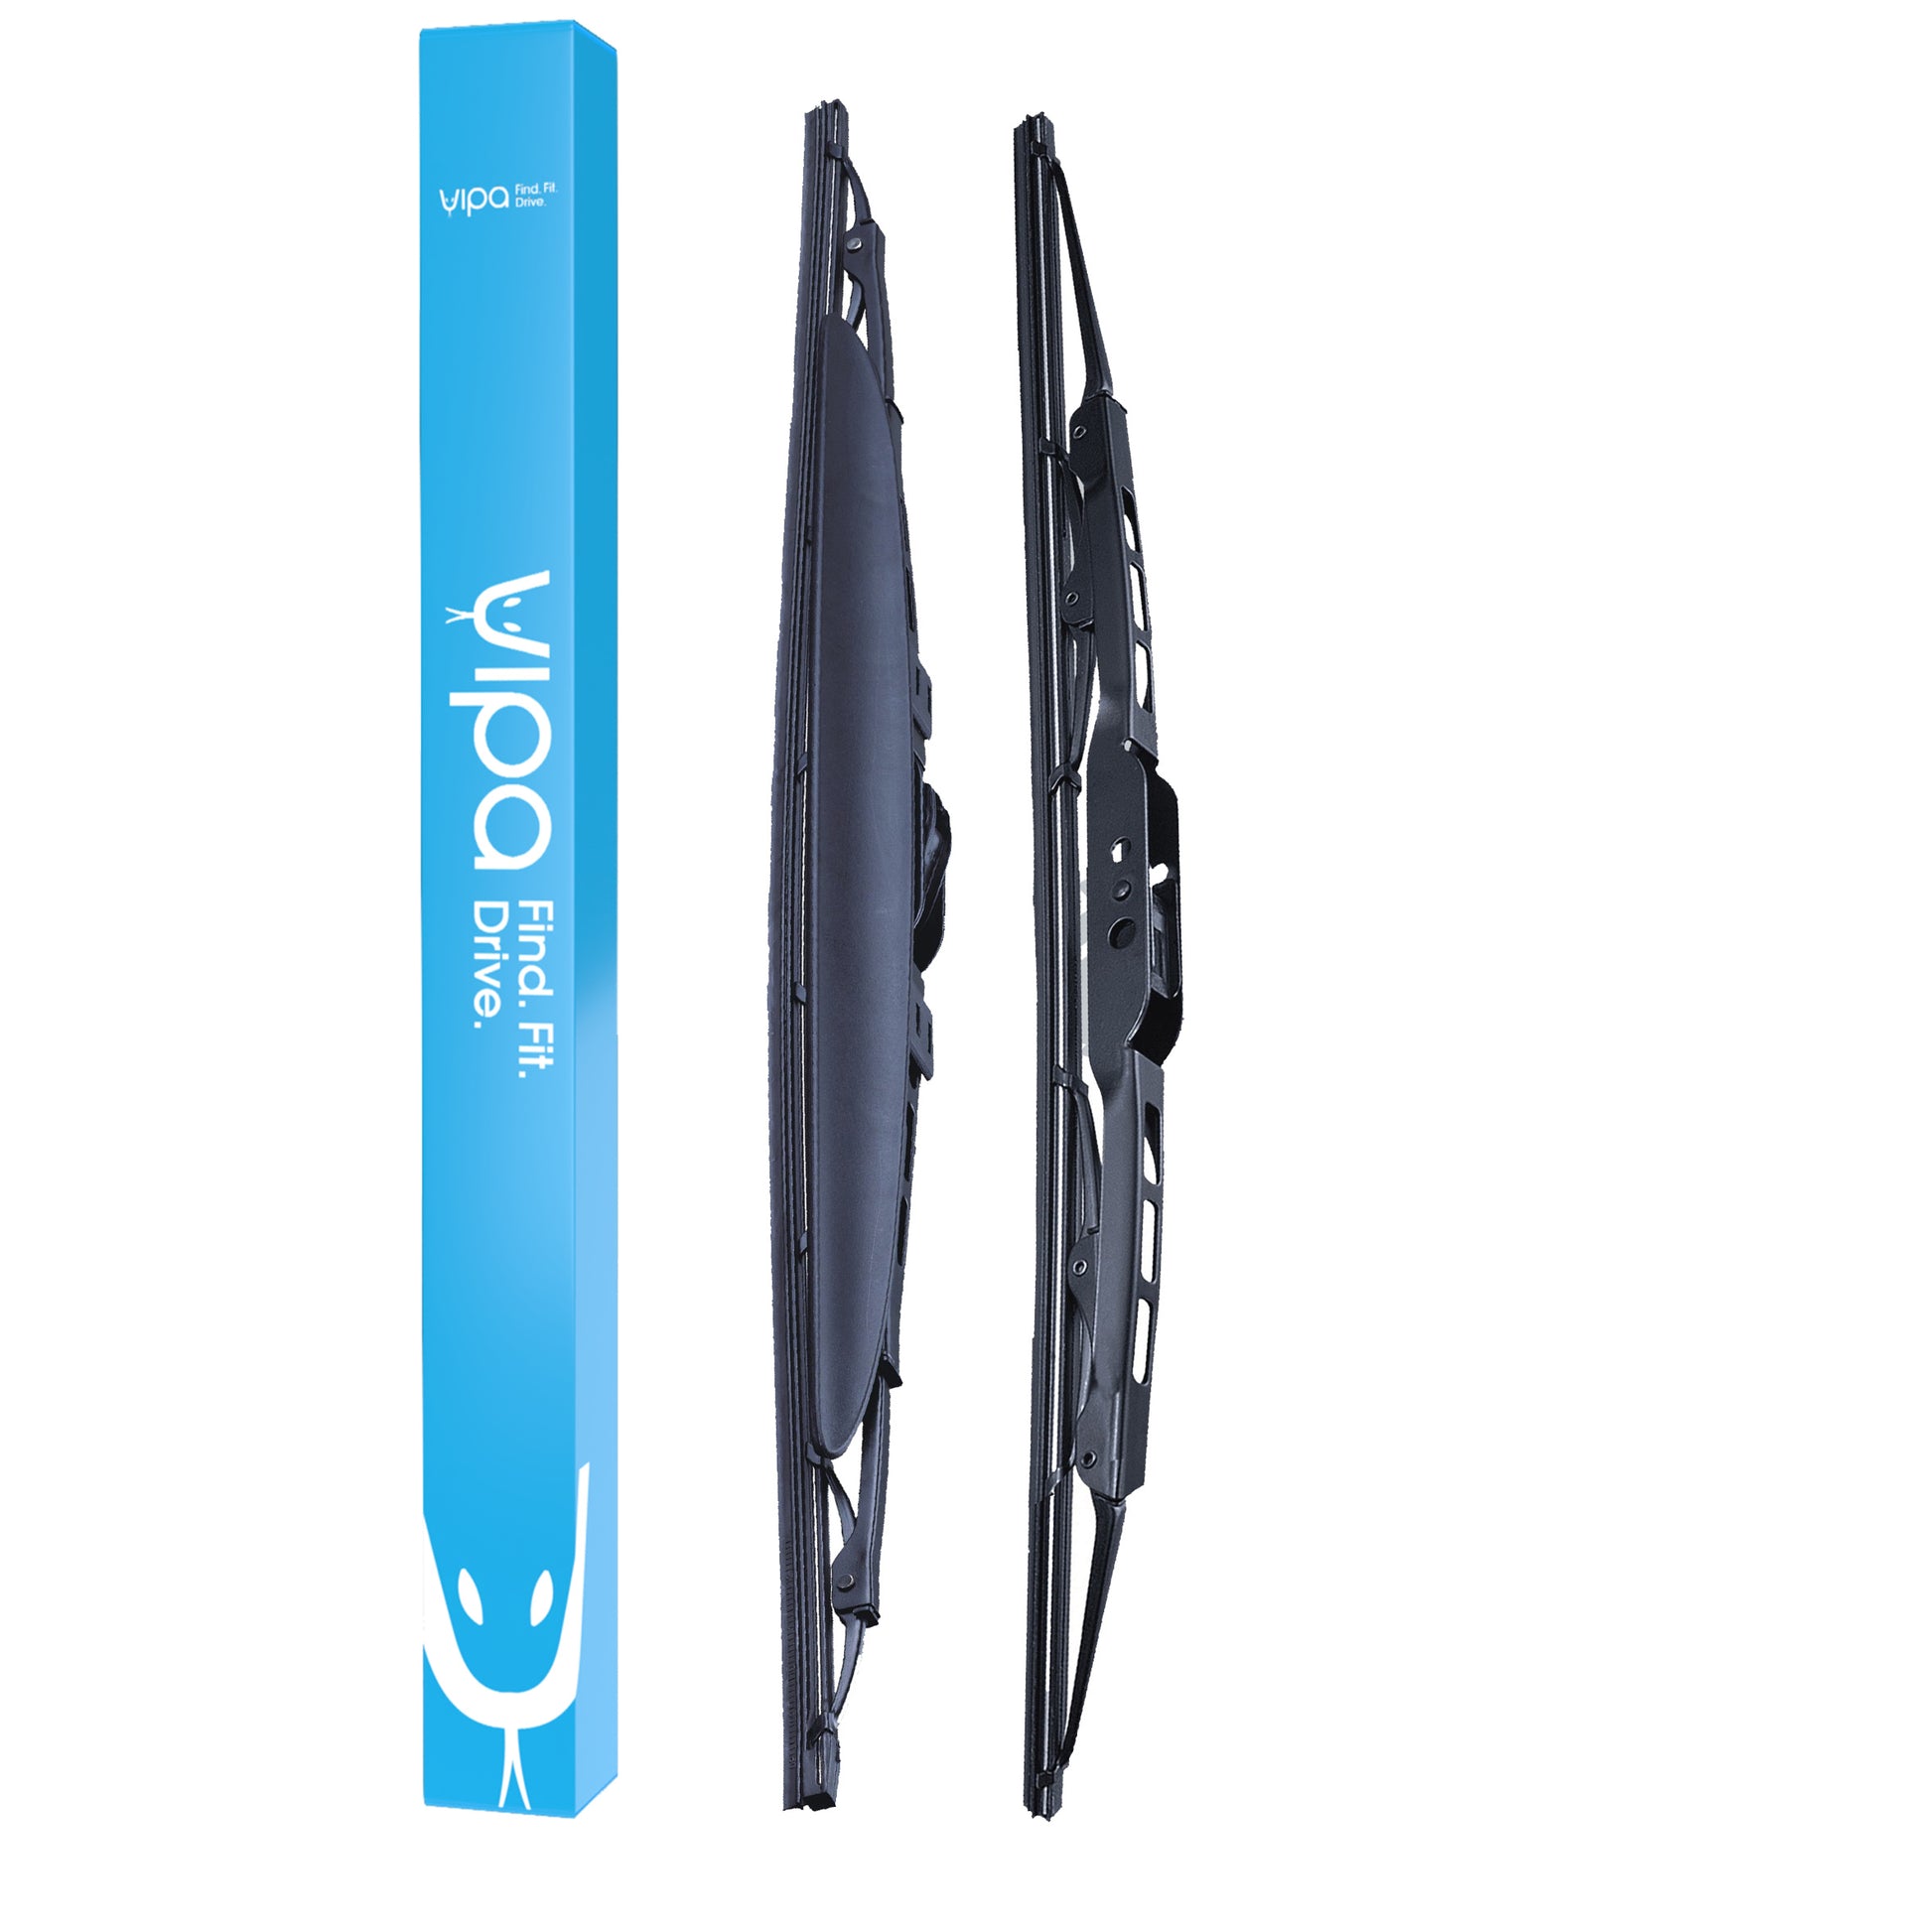 NISSAN SILVIA Coupe Apr 1994 to Dec 2003 Wiper Blade Kit